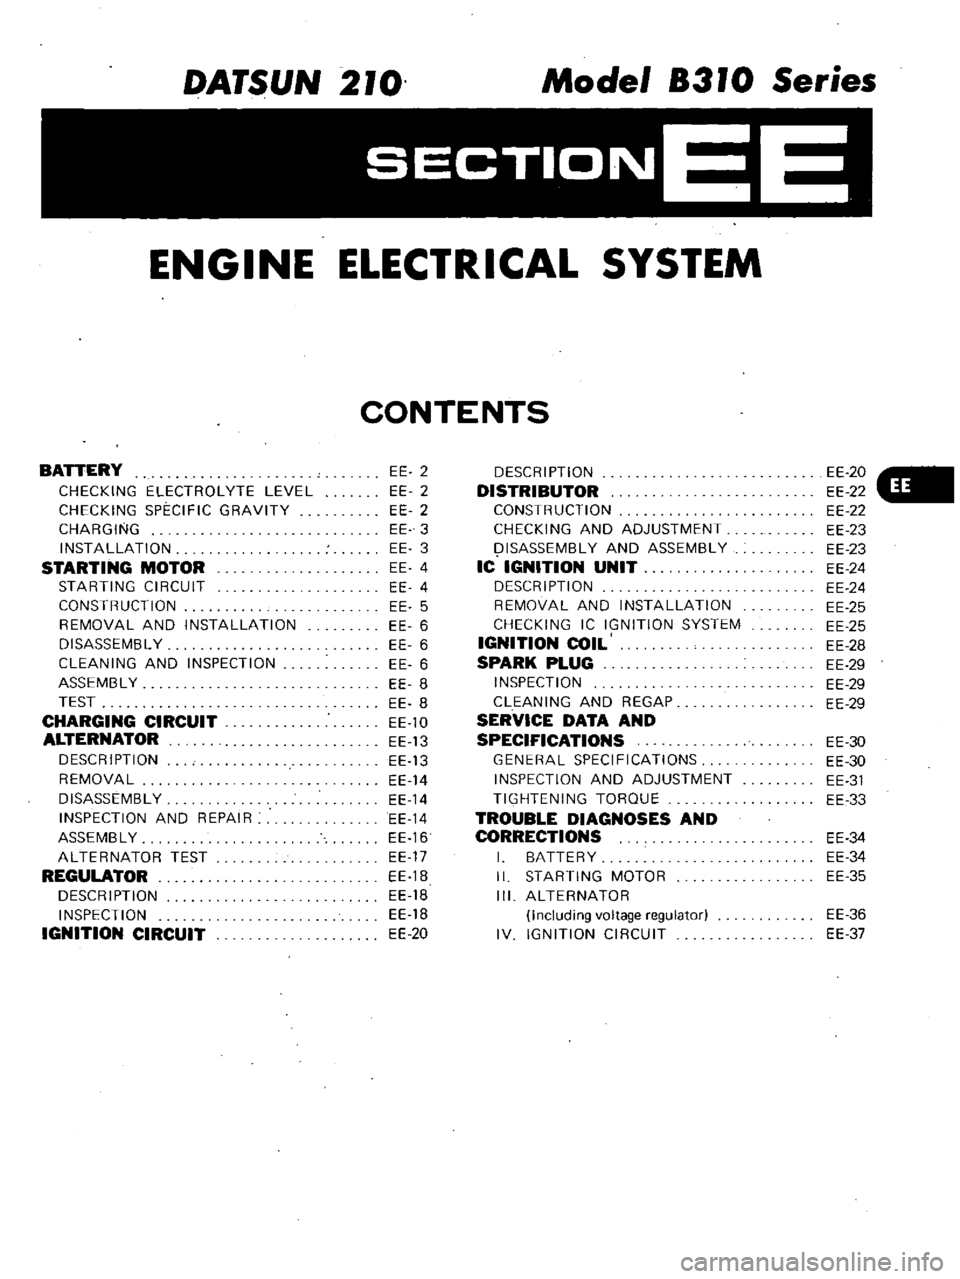 DATSUN 210 1979 Workshop Manual 
DATSUN

210 
Model

8310 
Series

SECTIONEE

ENGINE 
ELECTRICAL 
SYSTEM

CONTENTS

BATTERY

CHECKING 
ELECTROLYTE 
LEVEL

CHECKING

SPECIFIC 
GRAVITY

CHARGING

INSTALLATION

STARTING 
MOTOR

STARTIN